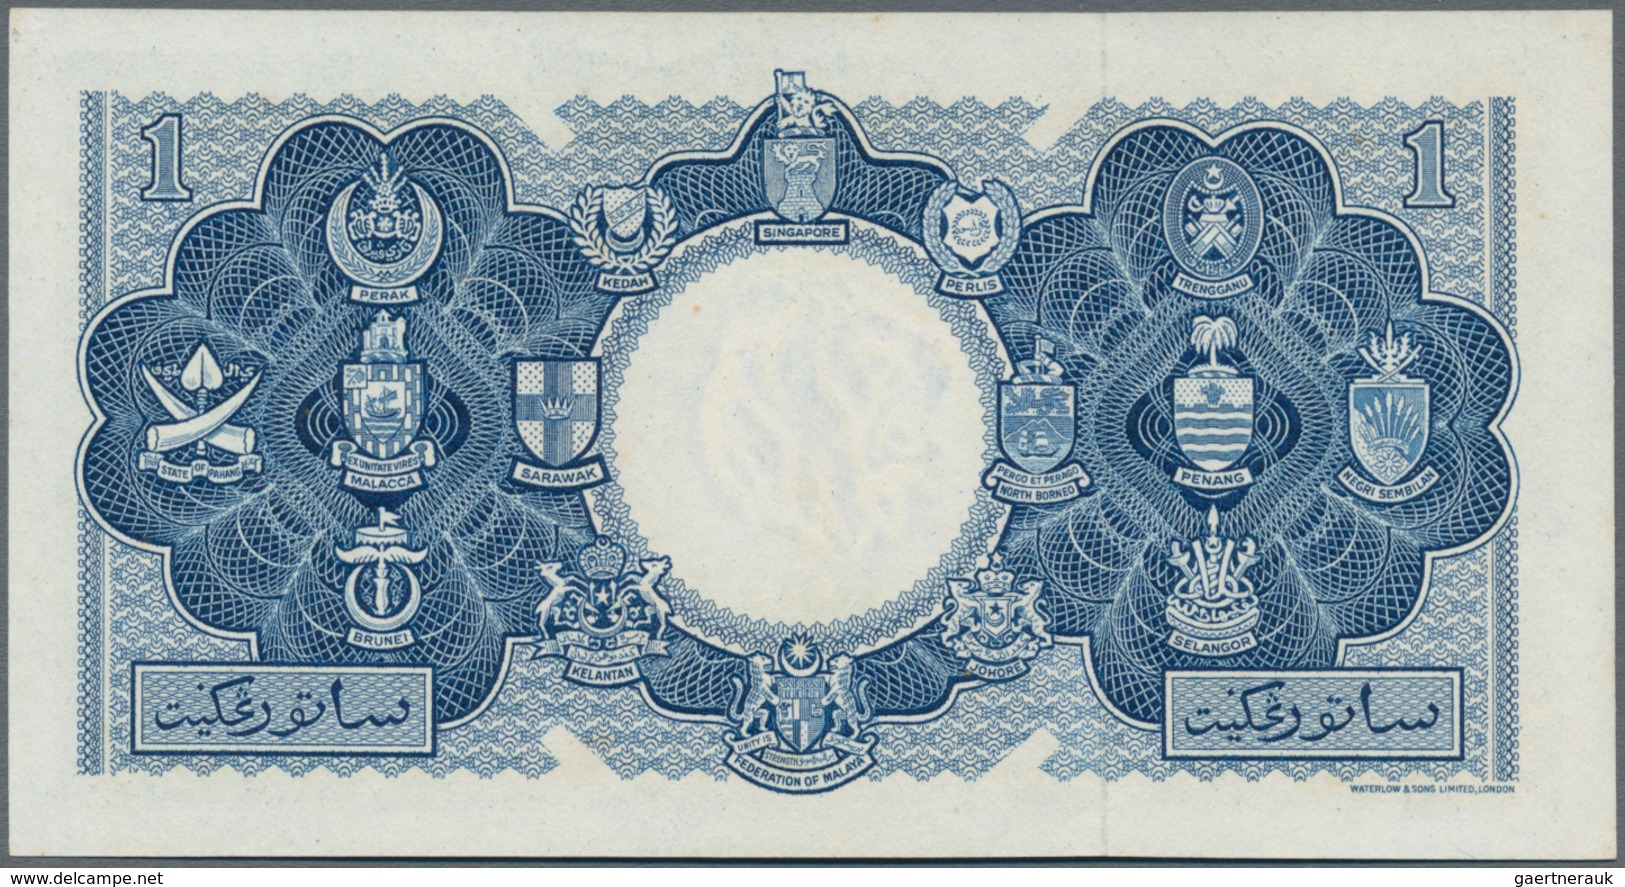 Malaya & British Borneo: Board Of Commissioners Of Currency Set With 3 Banknotes Of The 1953 Series - Malaysia